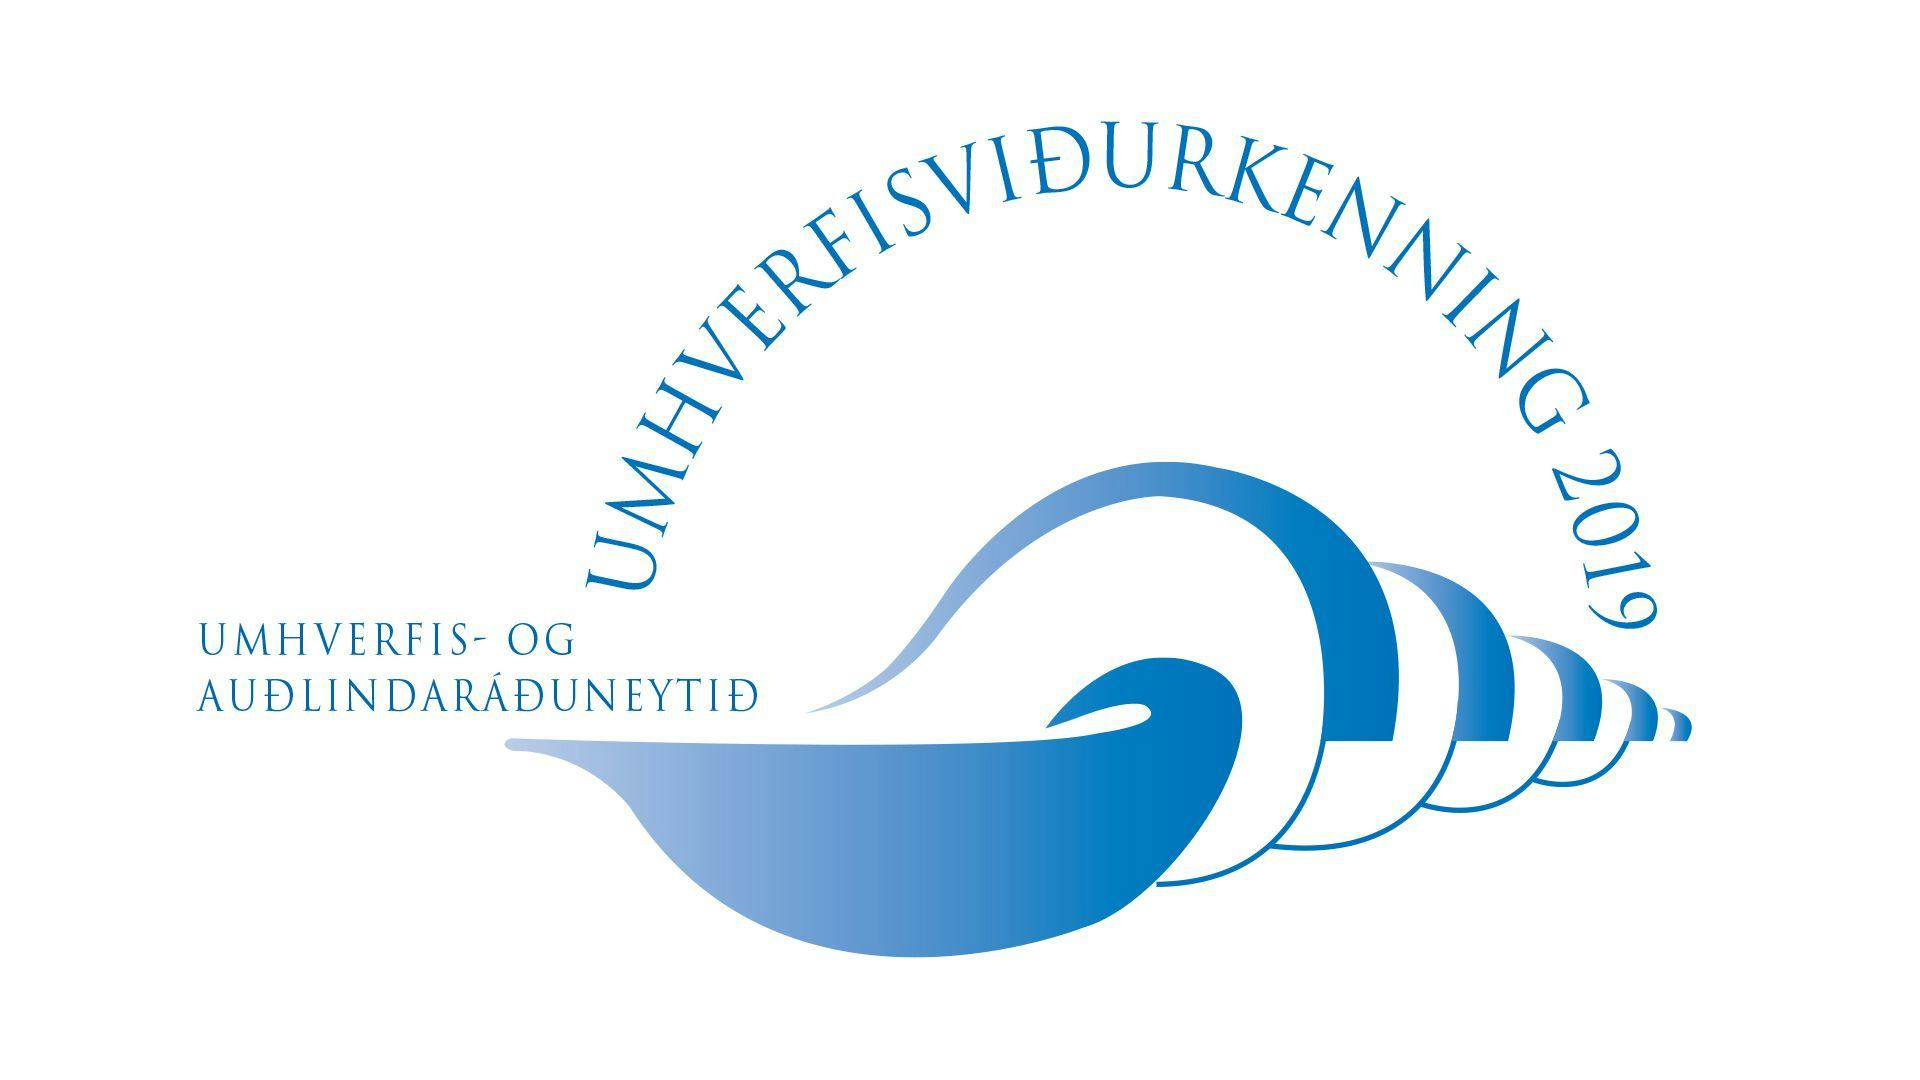 A shell shaped logo with some Icelandic texts